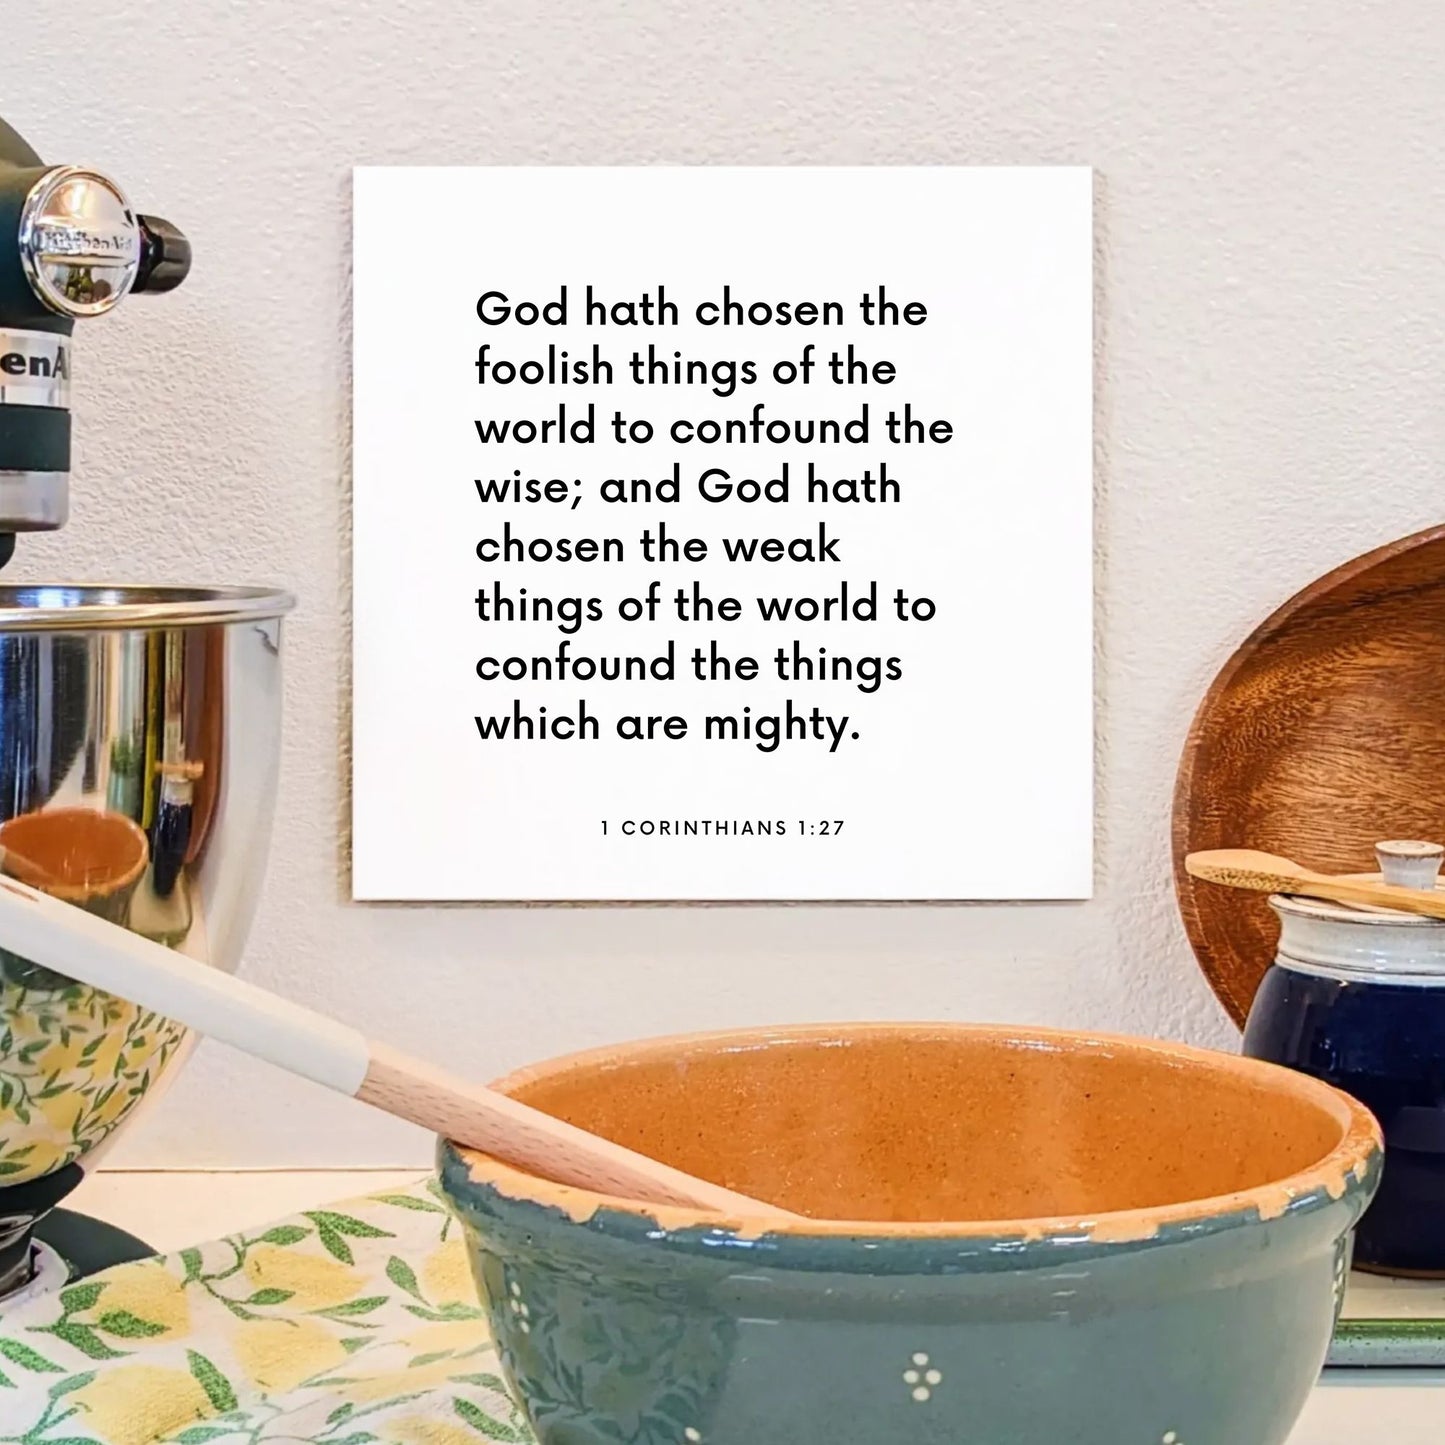 Kitchen mouting of the scripture tile for 1 Corinthians 1:27 - "God hath chosen the foolish things of the world"